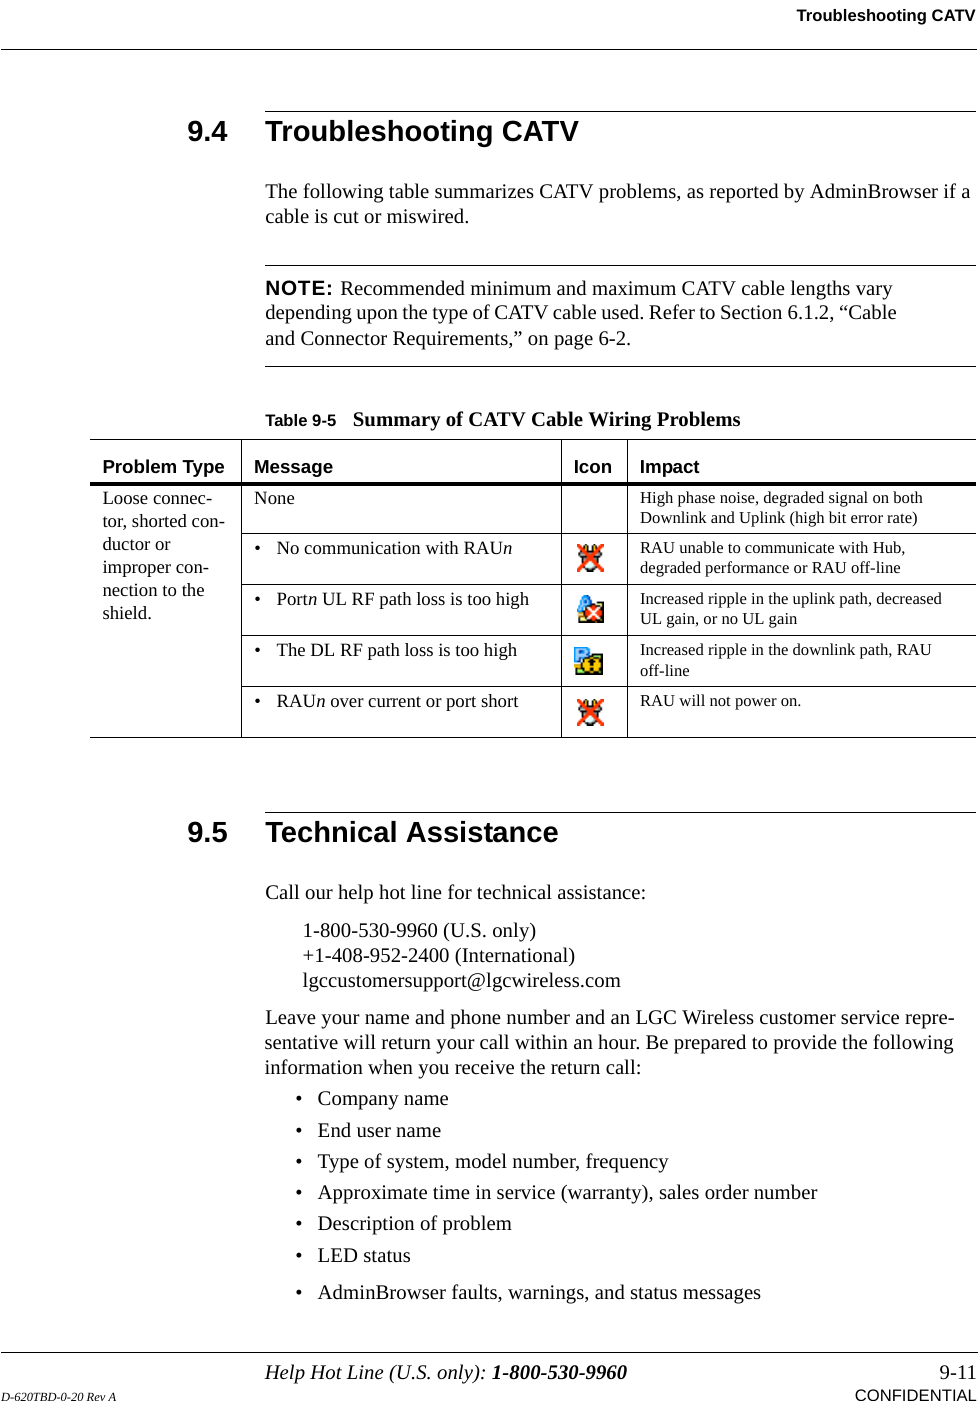 Help Hot Line (U.S. only): 1-800-530-9960 9-11D-620TBD-0-20 Rev A CONFIDENTIALTroubleshooting CATV9.4 Troubleshooting CATVThe following table summarizes CATV problems, as reported by AdminBrowser if a cable is cut or miswired.NOTE: Recommended minimum and maximum CATV cable lengths vary depending upon the type of CATV cable used. Refer to Section 6.1.2, “Cable and Connector Requirements,” on page 6-2.9.5 Technical AssistanceCall our help hot line for technical assistance:1-800-530-9960 (U.S. only)+1-408-952-2400 (International)lgccustomersupport@lgcwireless.comLeave your name and phone number and an LGC Wireless customer service repre-sentative will return your call within an hour. Be prepared to provide the following information when you receive the return call:• Company name• End user name• Type of system, model number, frequency• Approximate time in service (warranty), sales order number• Description of problem• LED status• AdminBrowser faults, warnings, and status messagesTable 9-5 Summary of CATV Cable Wiring ProblemsProblem Type Message Icon ImpactLoose connec-tor, shorted con-ductor or improper con-nection to the shield.None High phase noise, degraded signal on both Downlink and Uplink (high bit error rate)• No communication with RAUn  RAU unable to communicate with Hub, degraded performance or RAU off-line• Portn UL RF path loss is too high Increased ripple in the uplink path, decreased UL gain, or no UL gain• The DL RF path loss is too high Increased ripple in the downlink path, RAU off-line•RAUn over current or port short RAU will not power on.